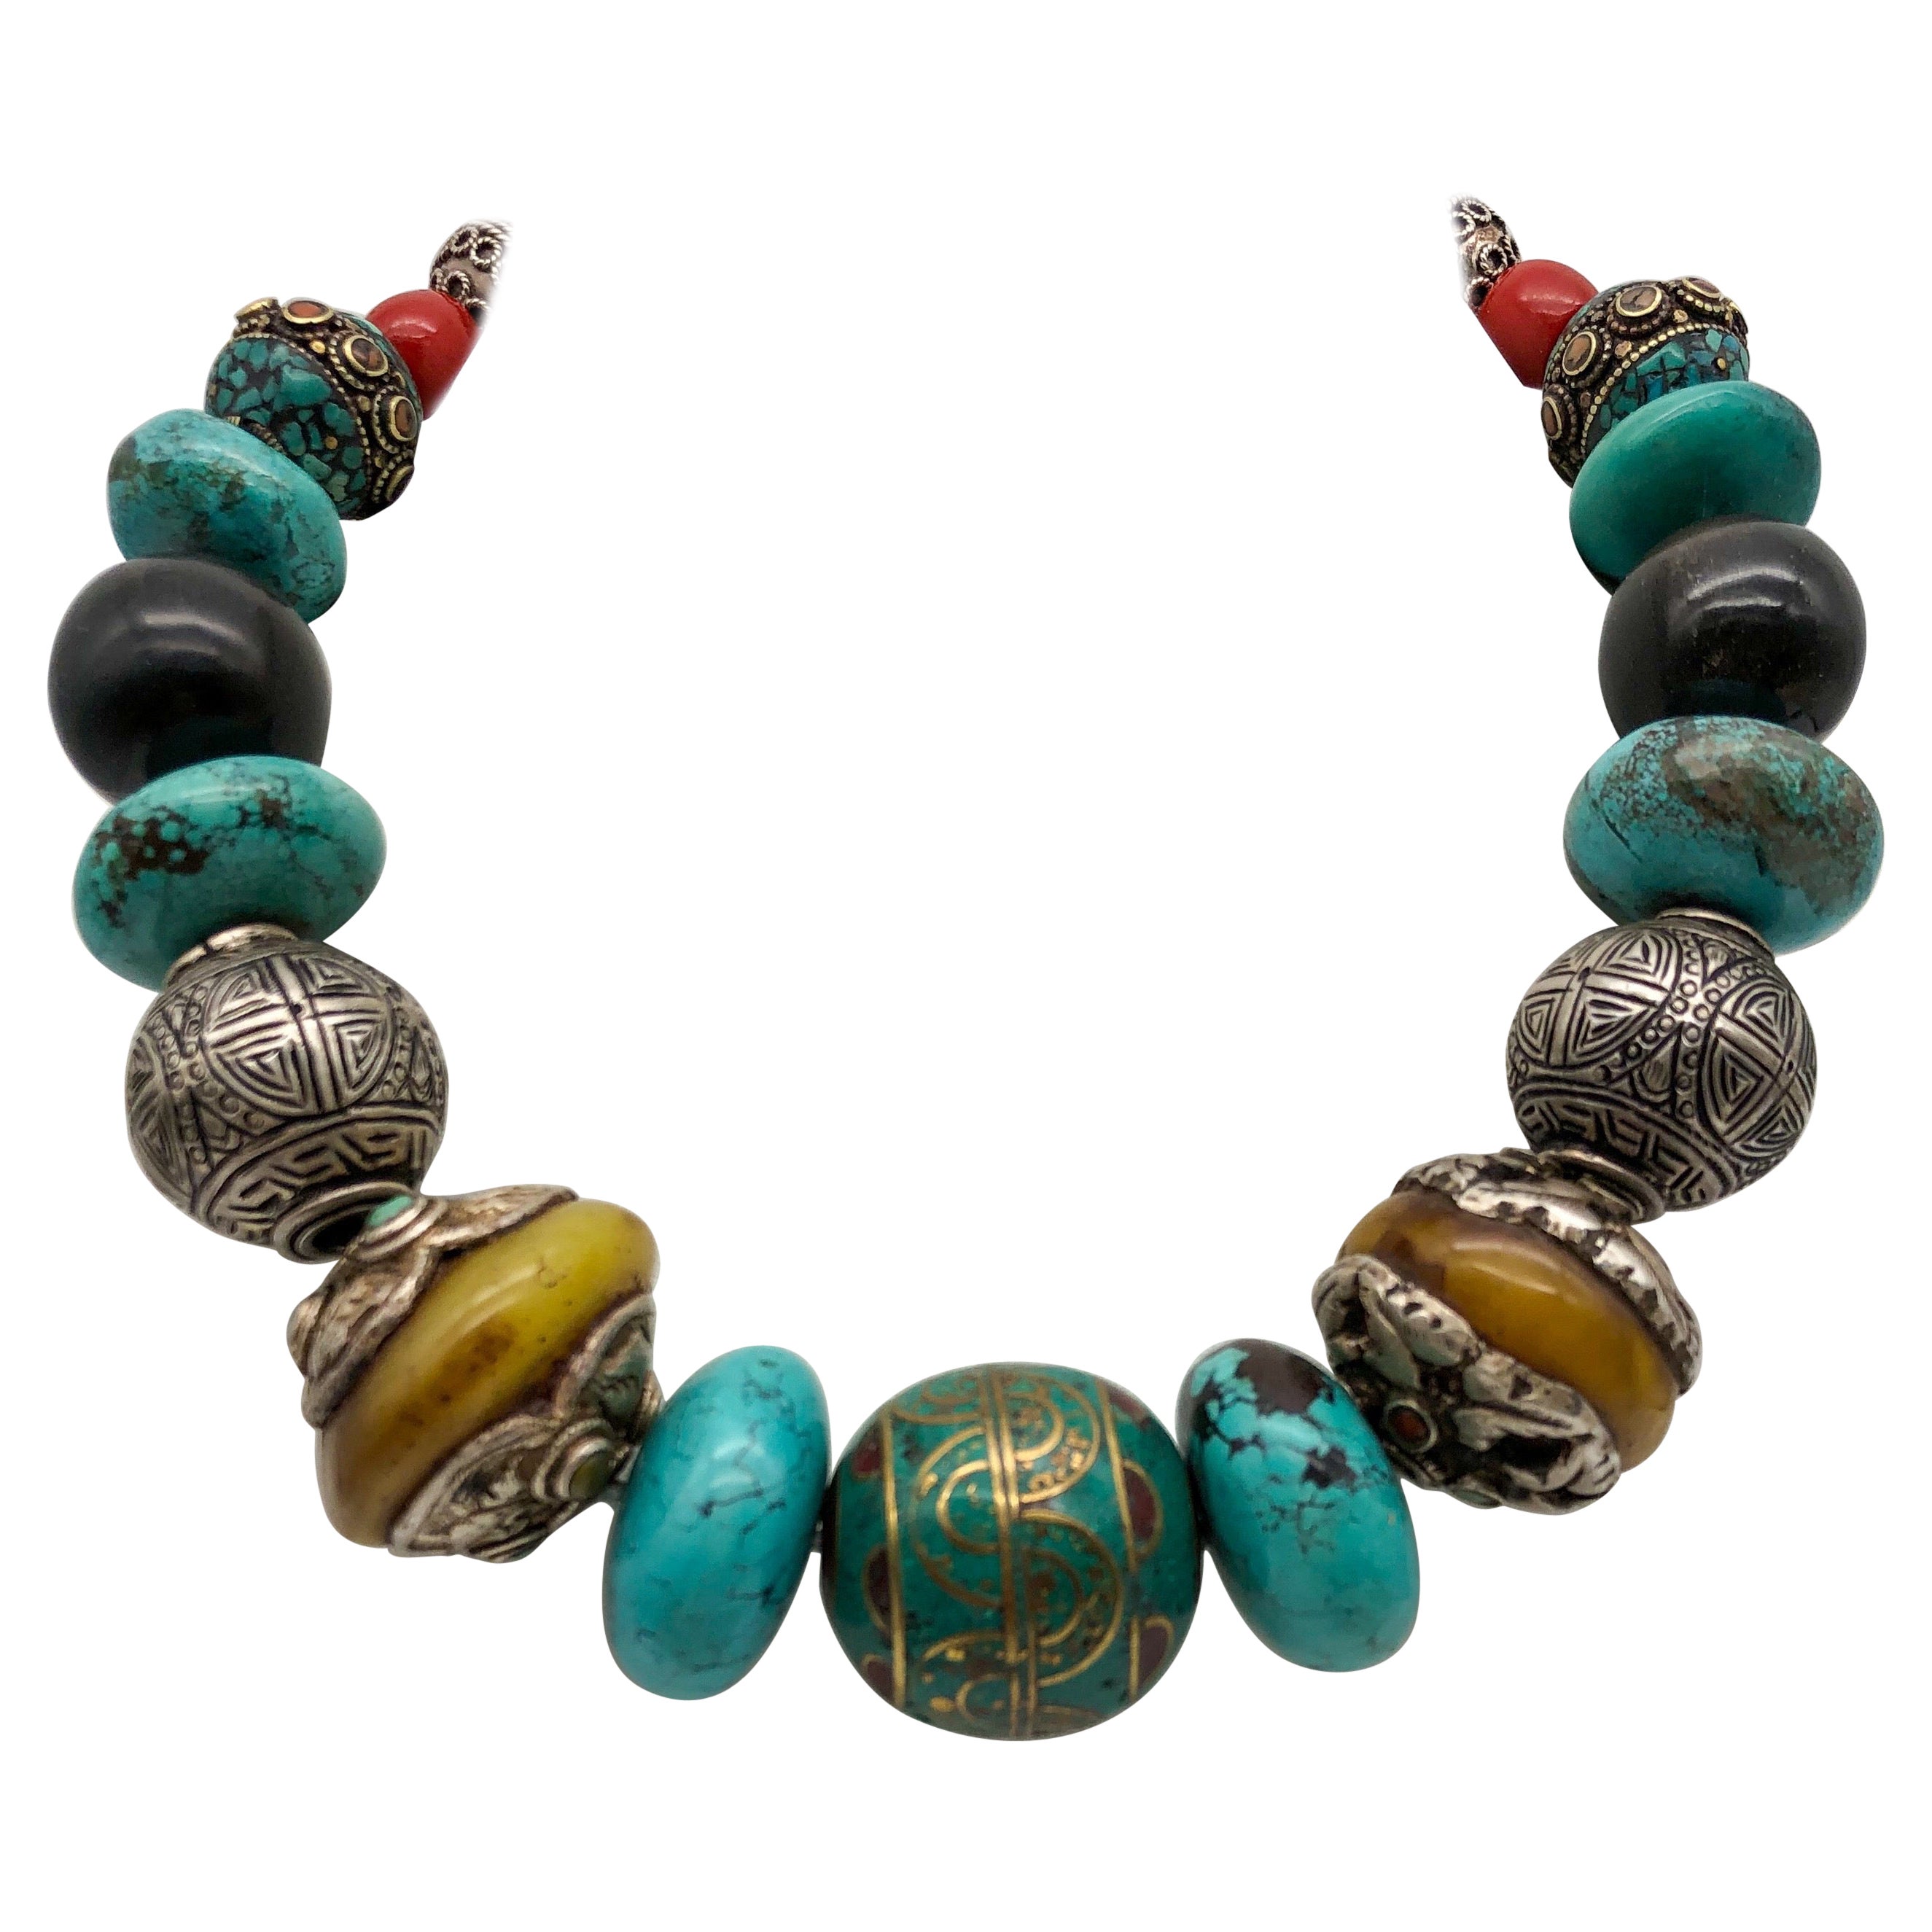 A.Jeschel Powerful Turquoise necklace with a large center bead of Tibetan. 